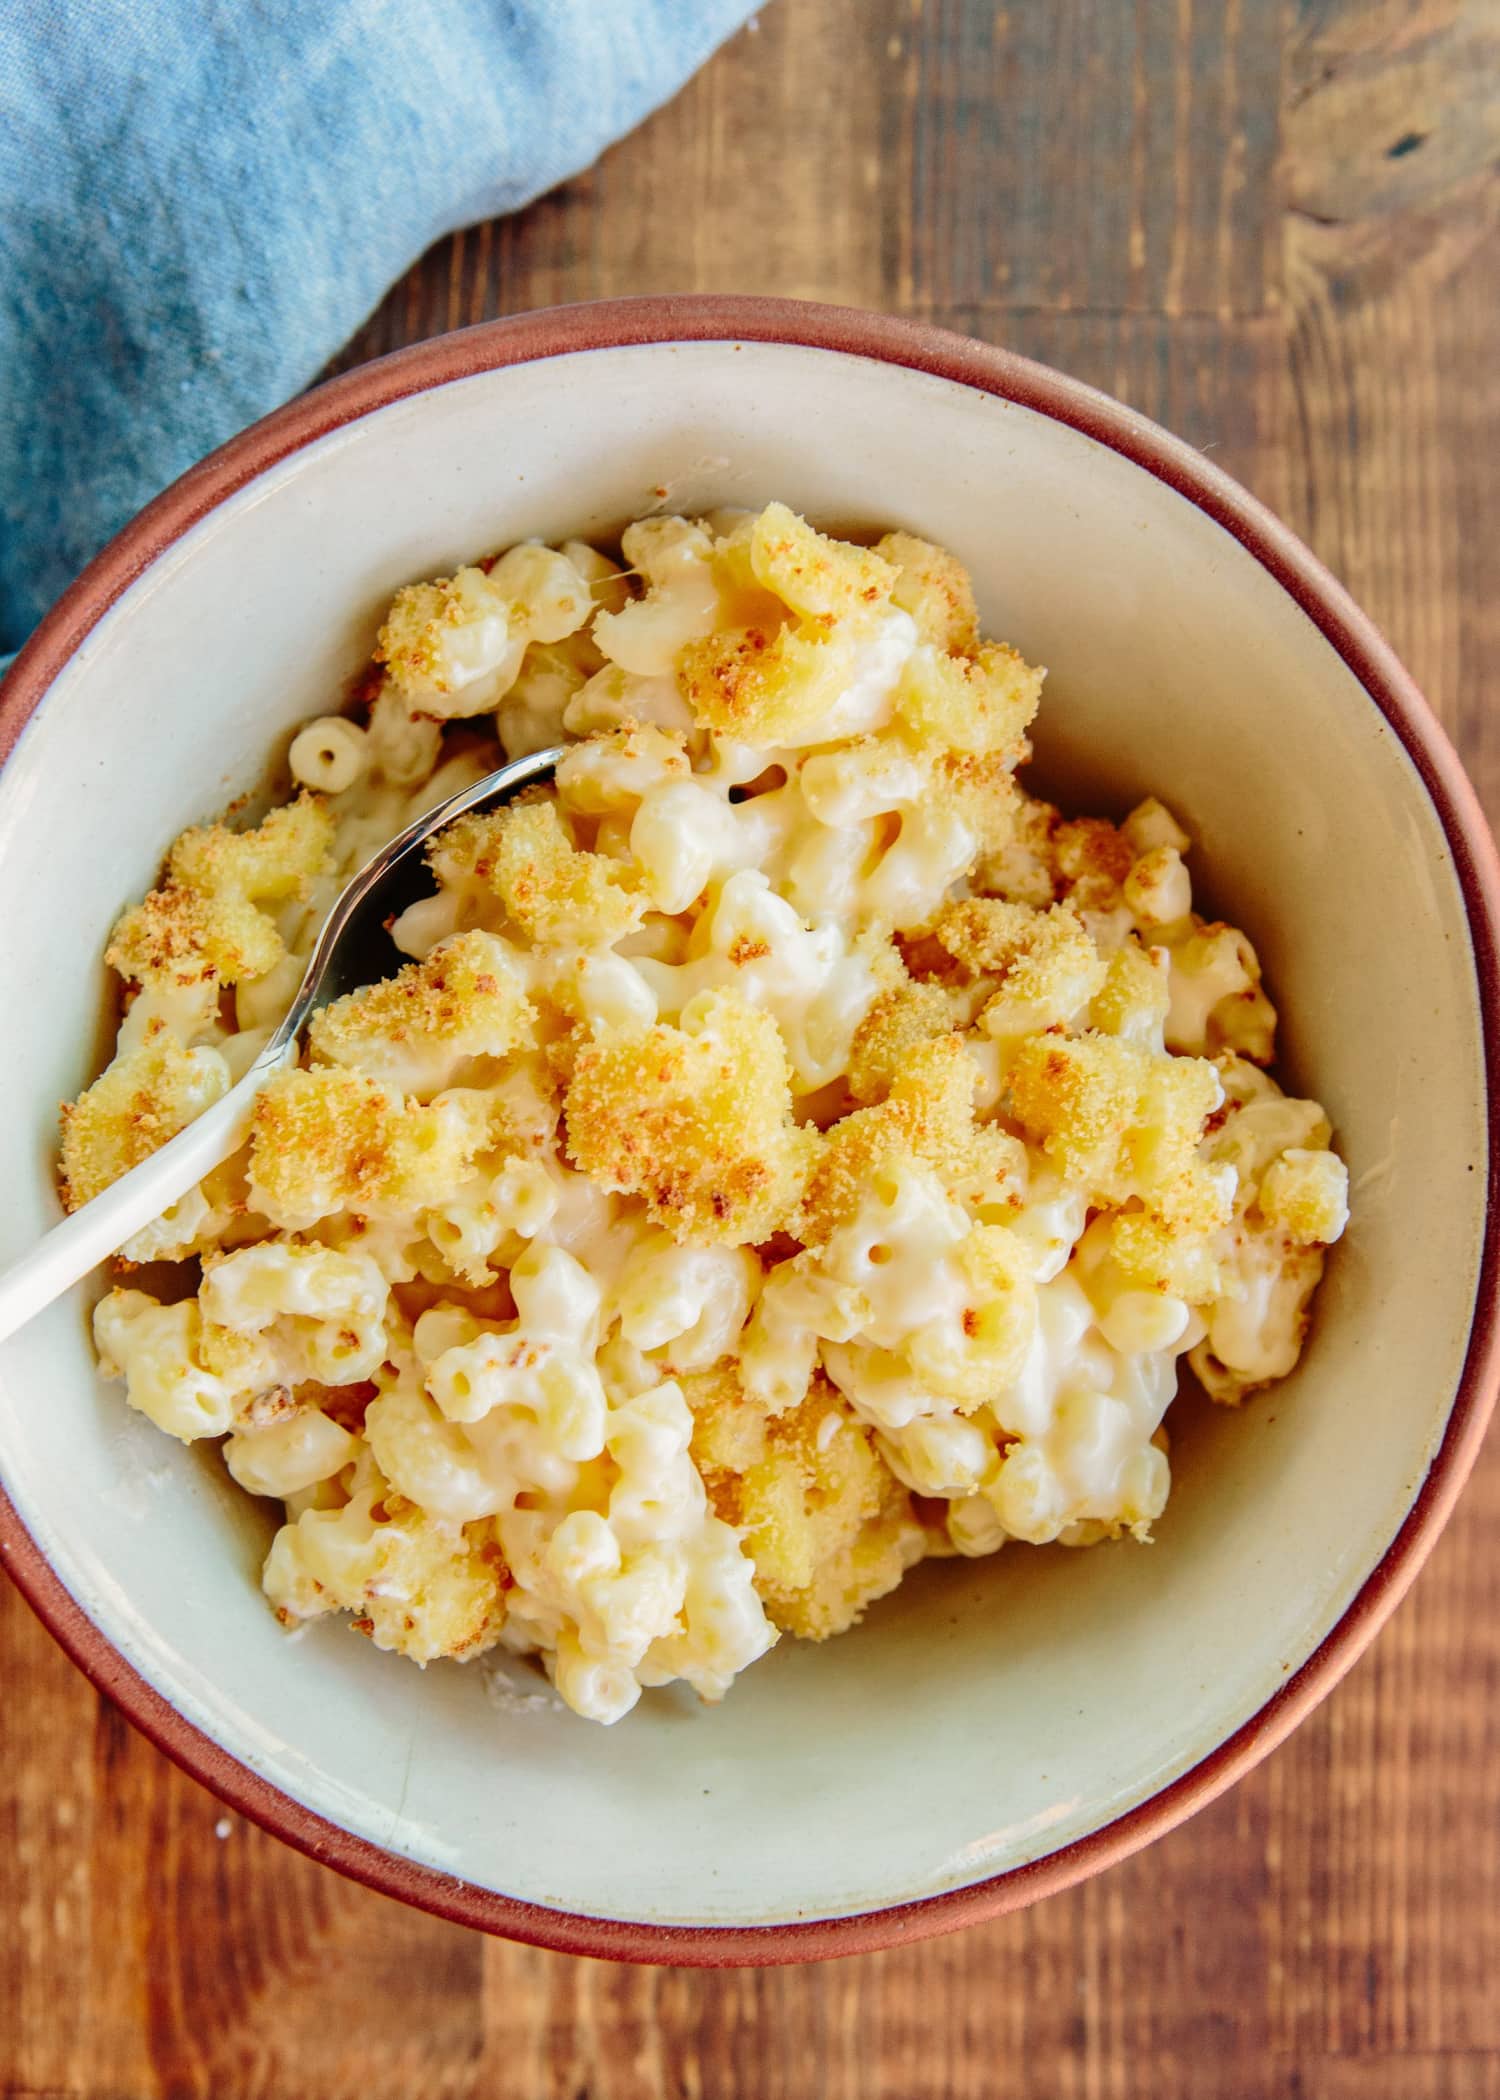 classic baked macaroni and cheese recipes